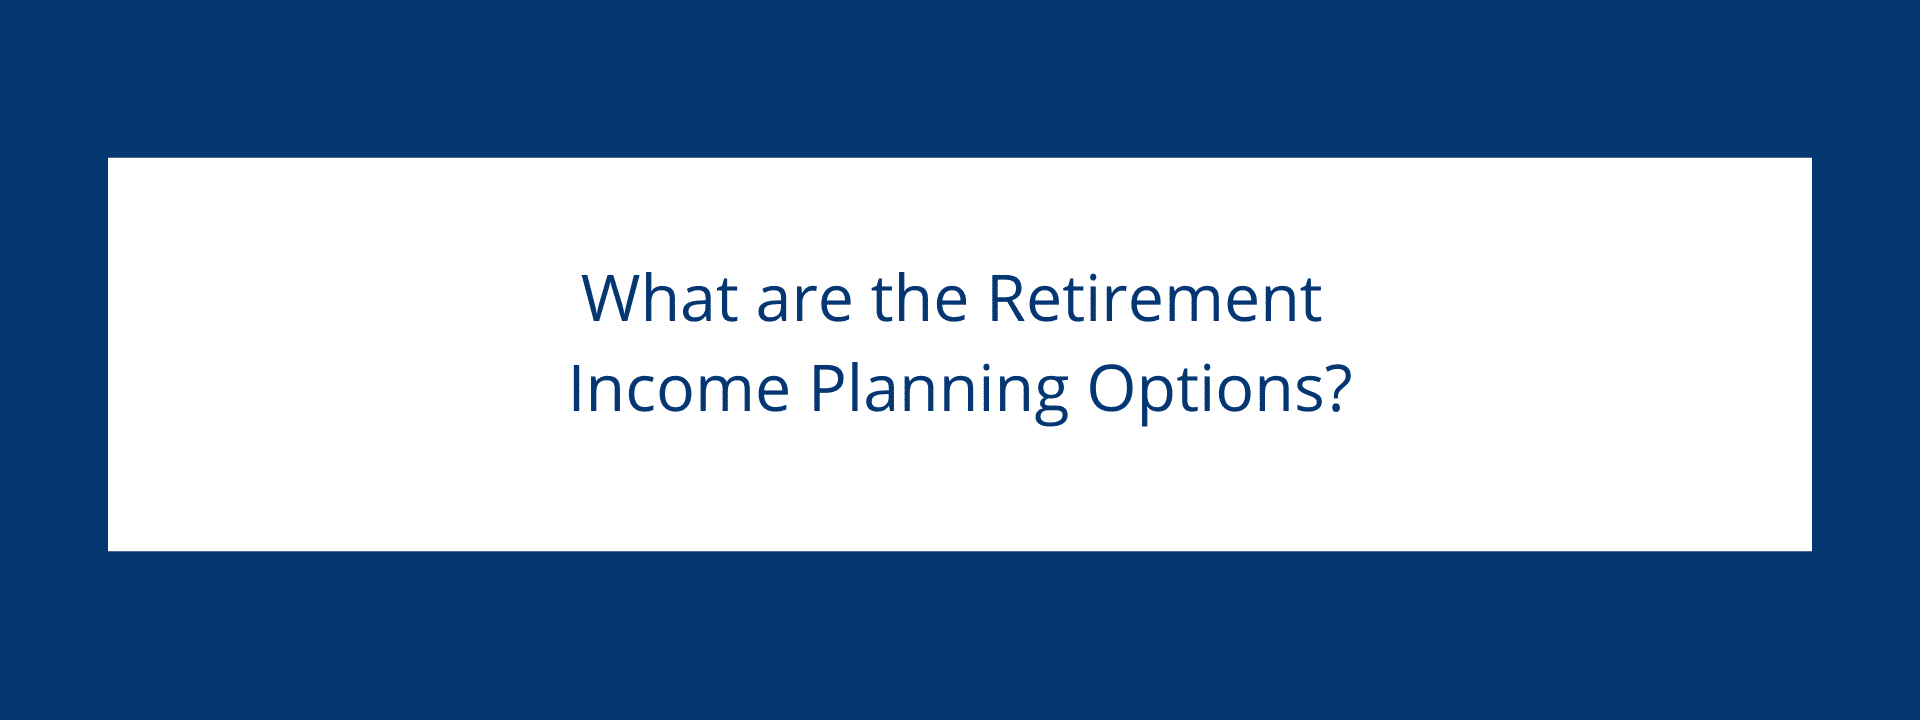 What are the Retirement Income Planning Options?